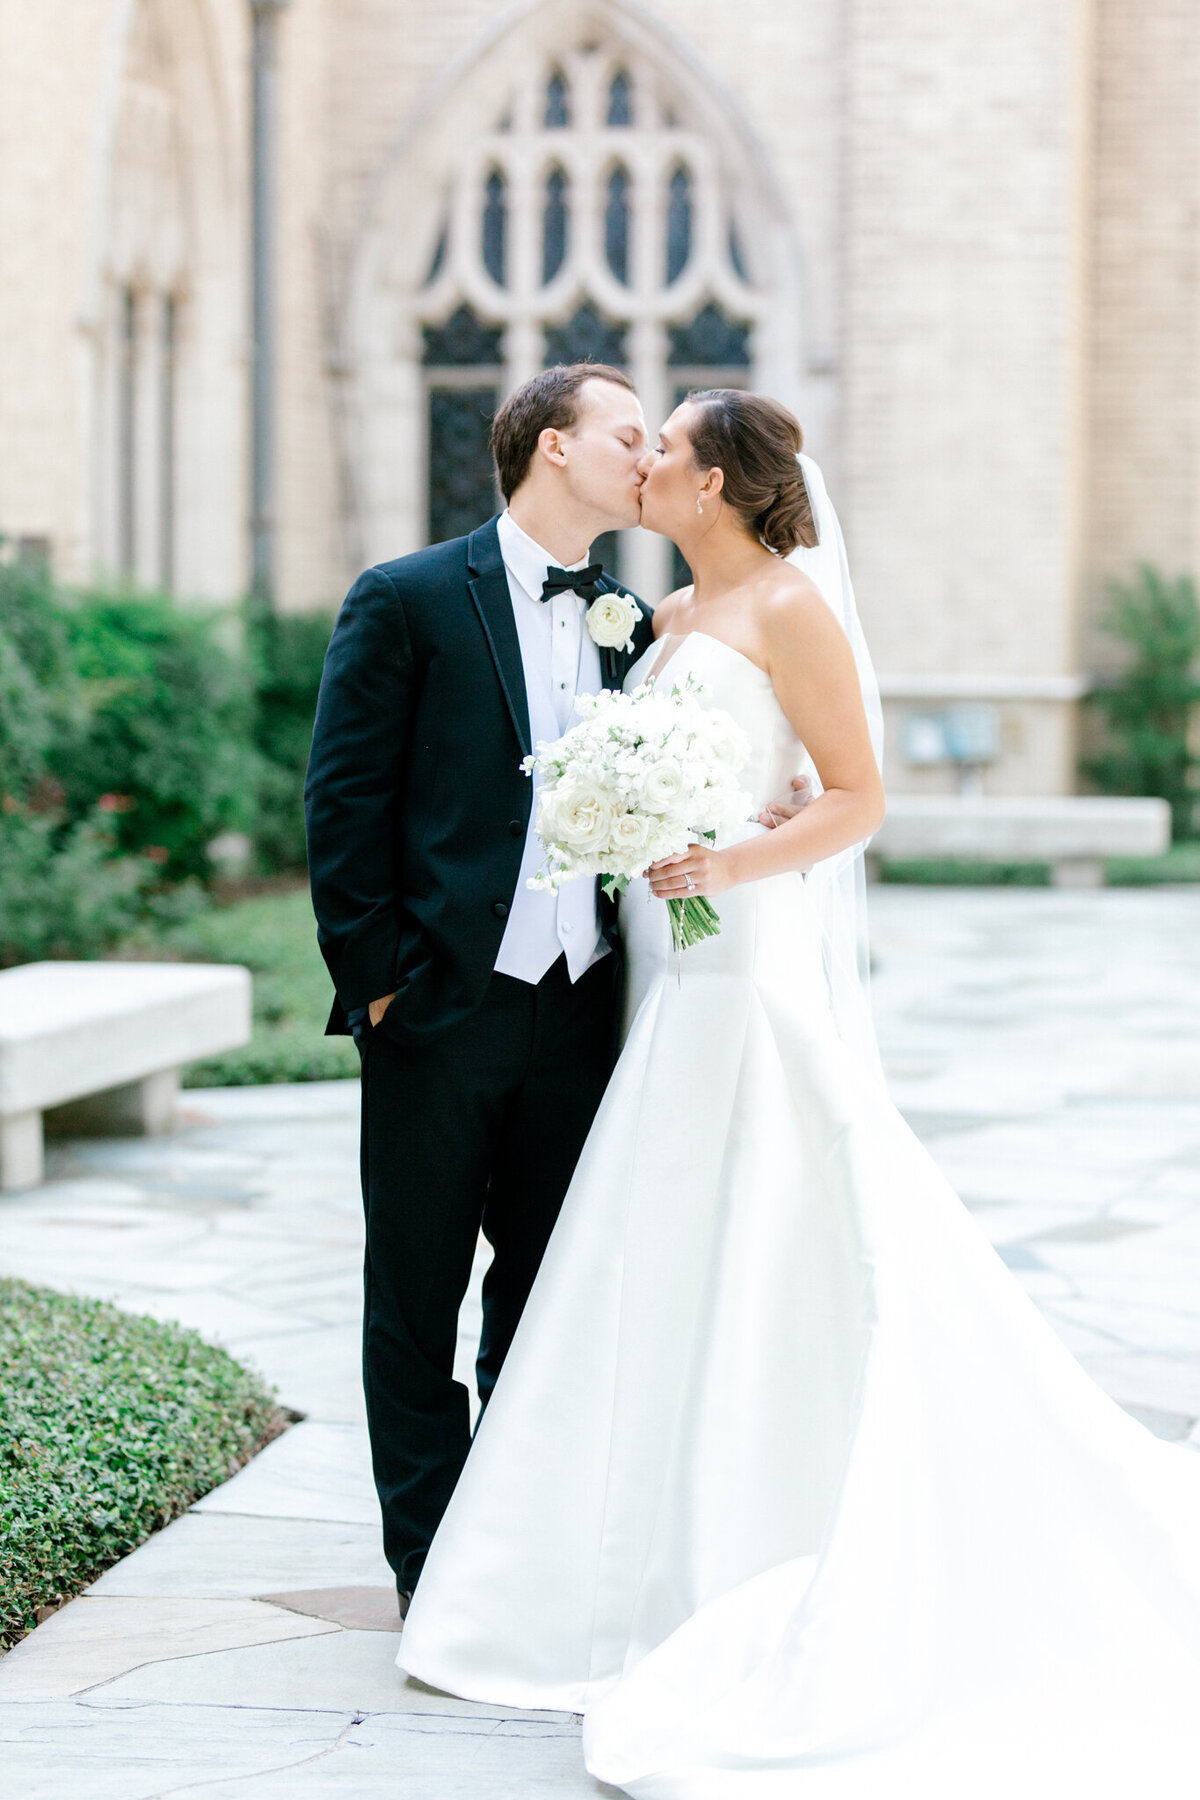 Wedding at the Crescent Court Hotel and Highland Park United Methodist Church in Dallas | Sami Kathryn Photography | DFW Wedding Photographer-15